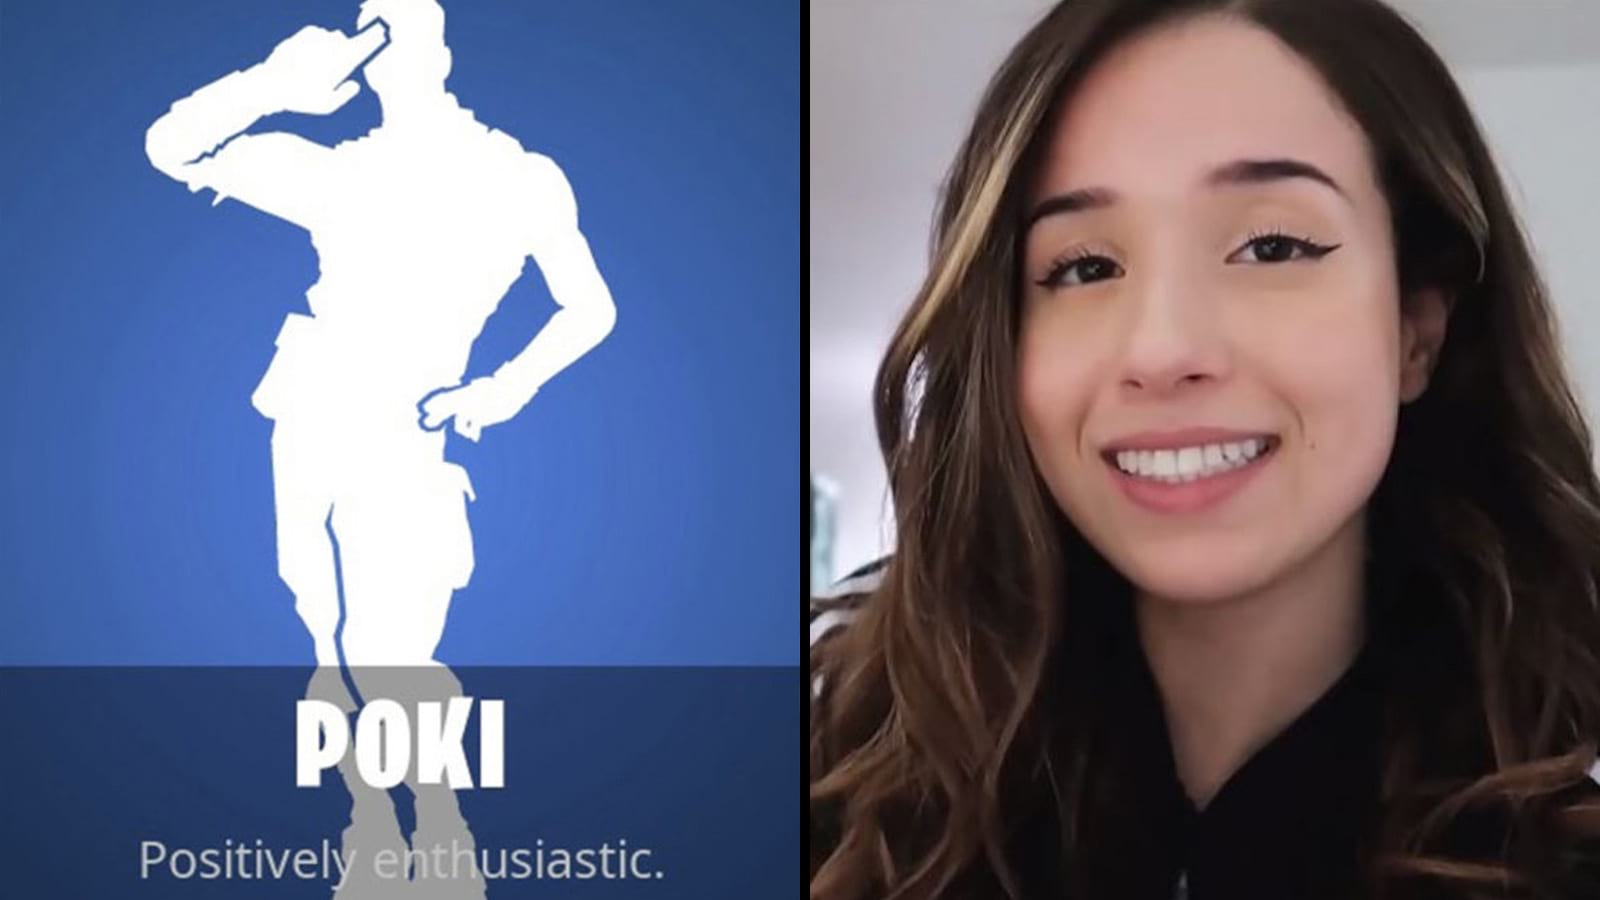 Pokimane's Fortnite emote has unintended consequences for every